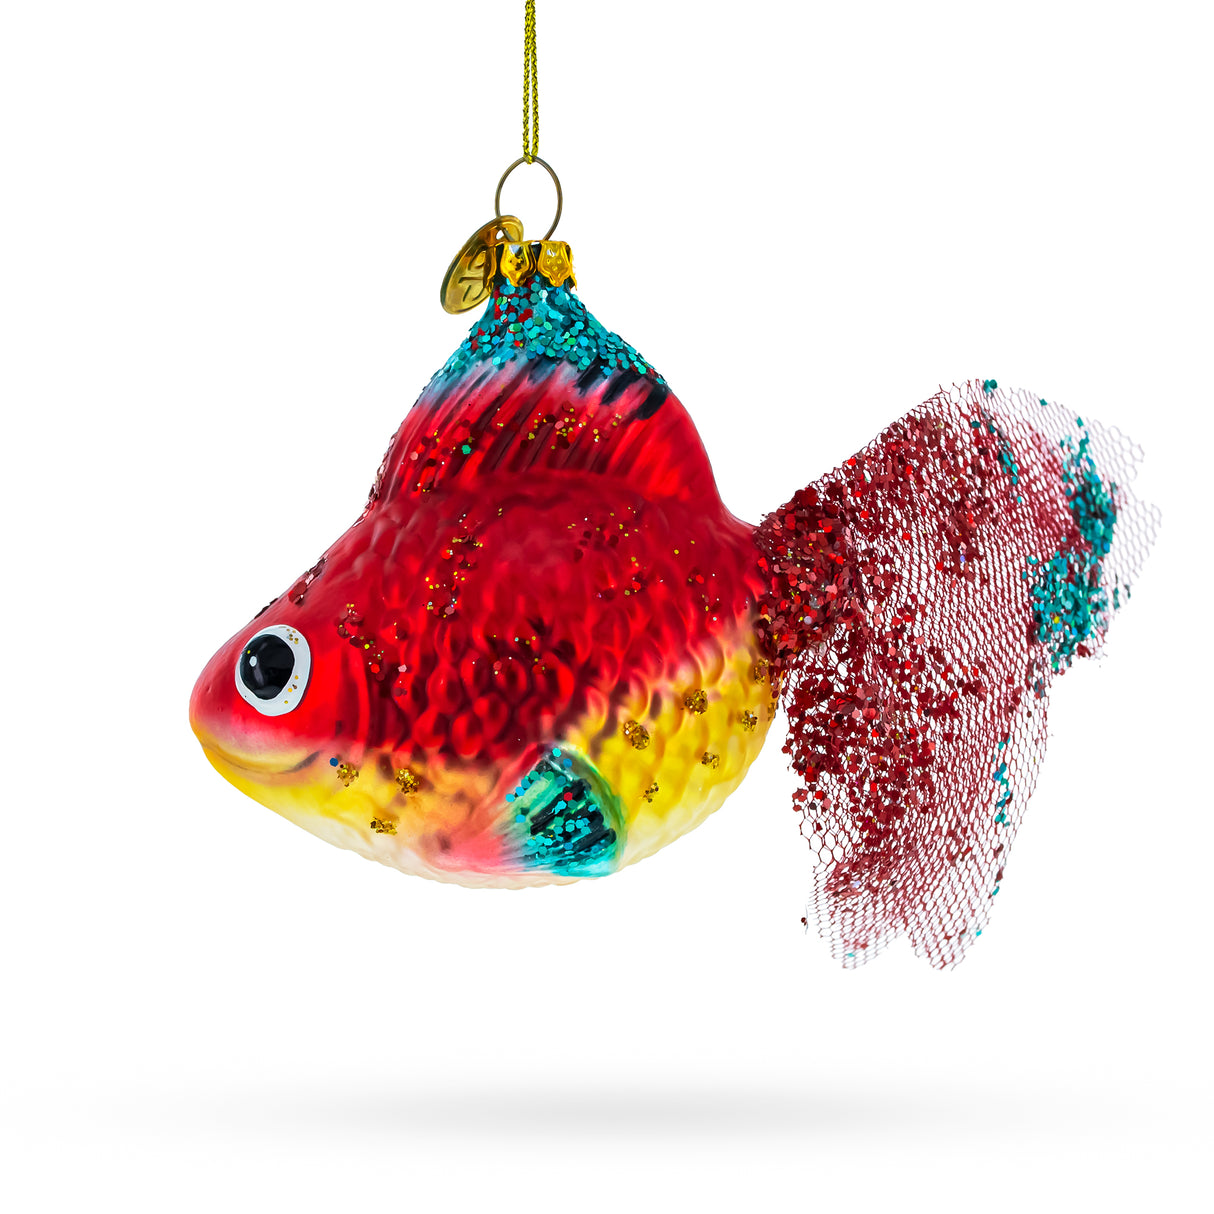 Buy Christmas Ornaments Animals Fish and Sea World Fishes by BestPysanky Online Gift Ship